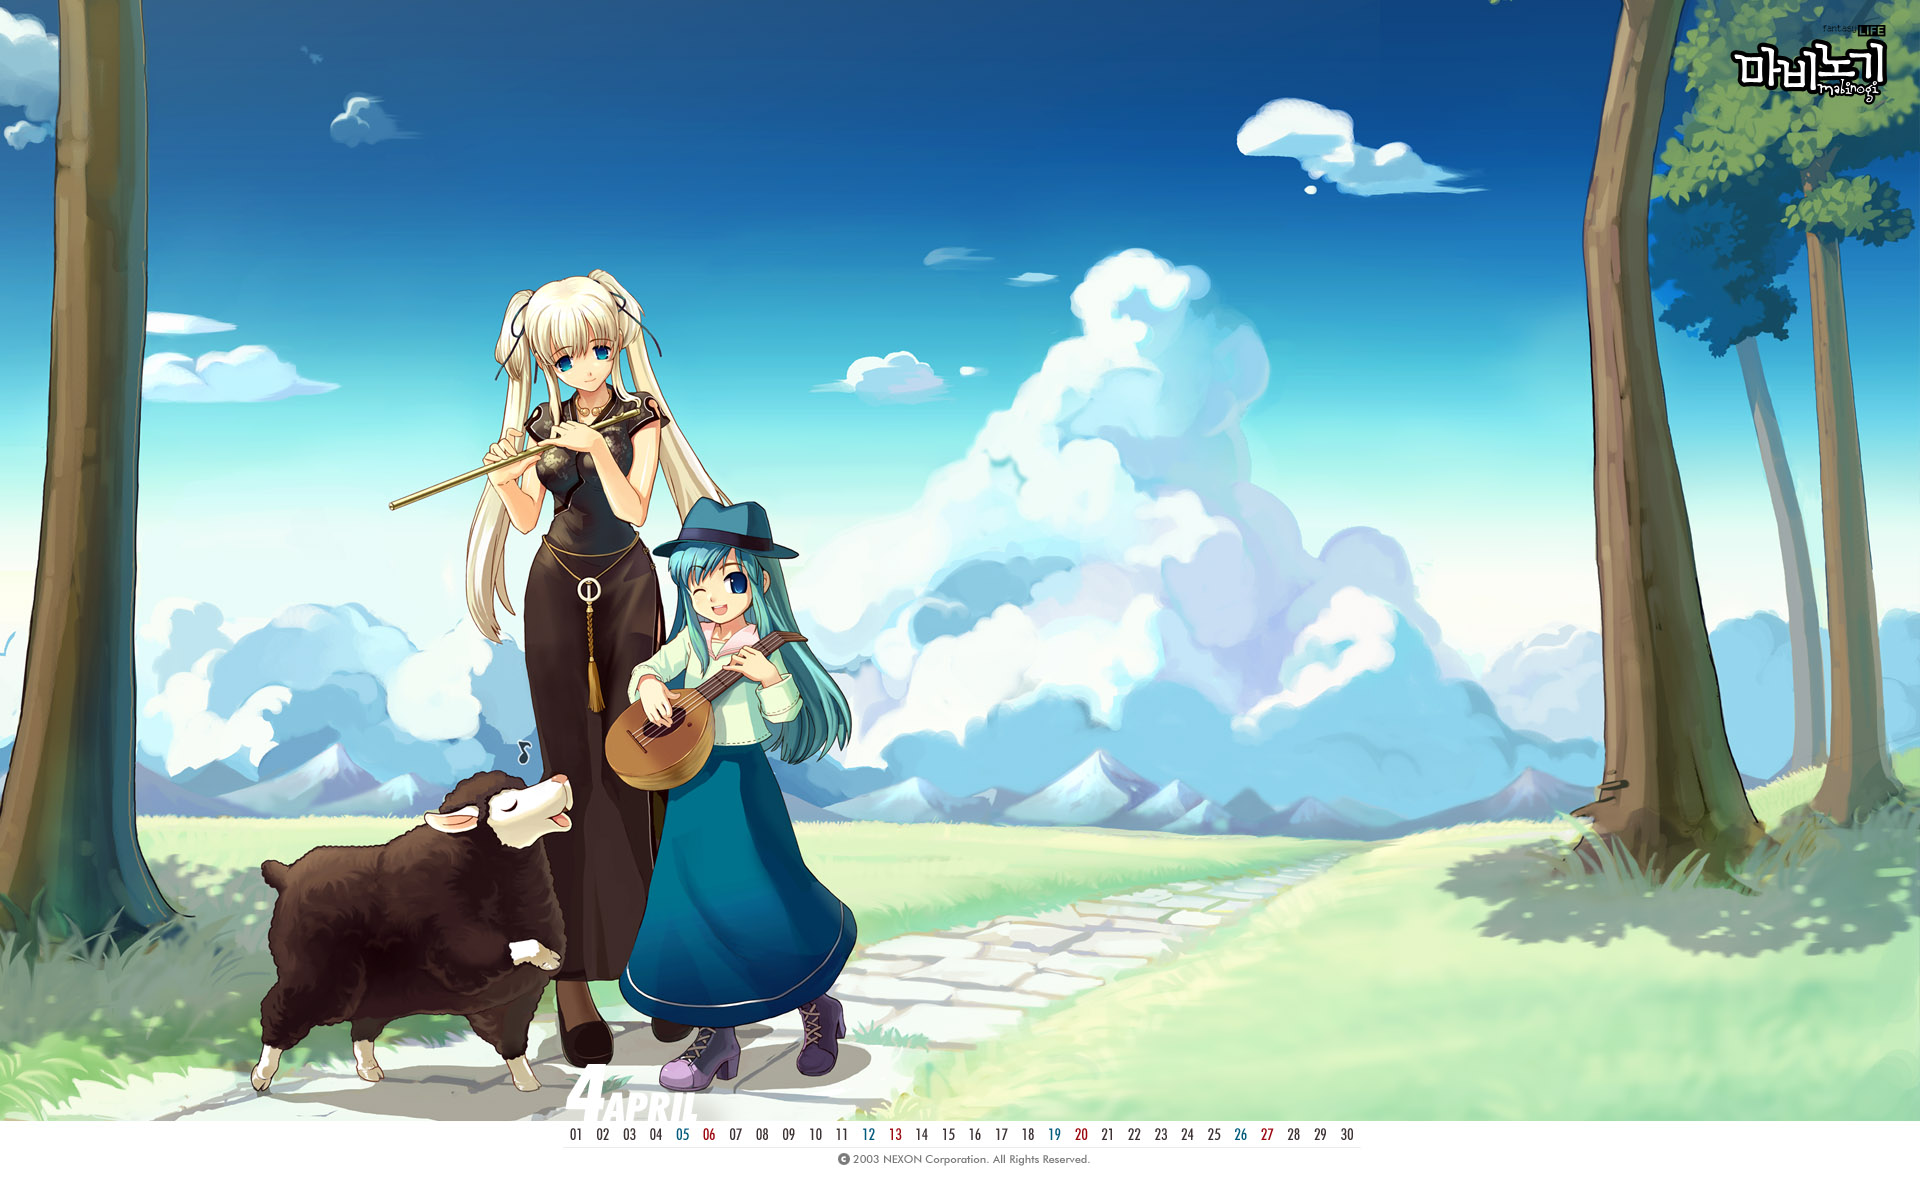 A femme looking adult playing a flute and femme looking child playing a ukelele standing outdoors with a sheep.